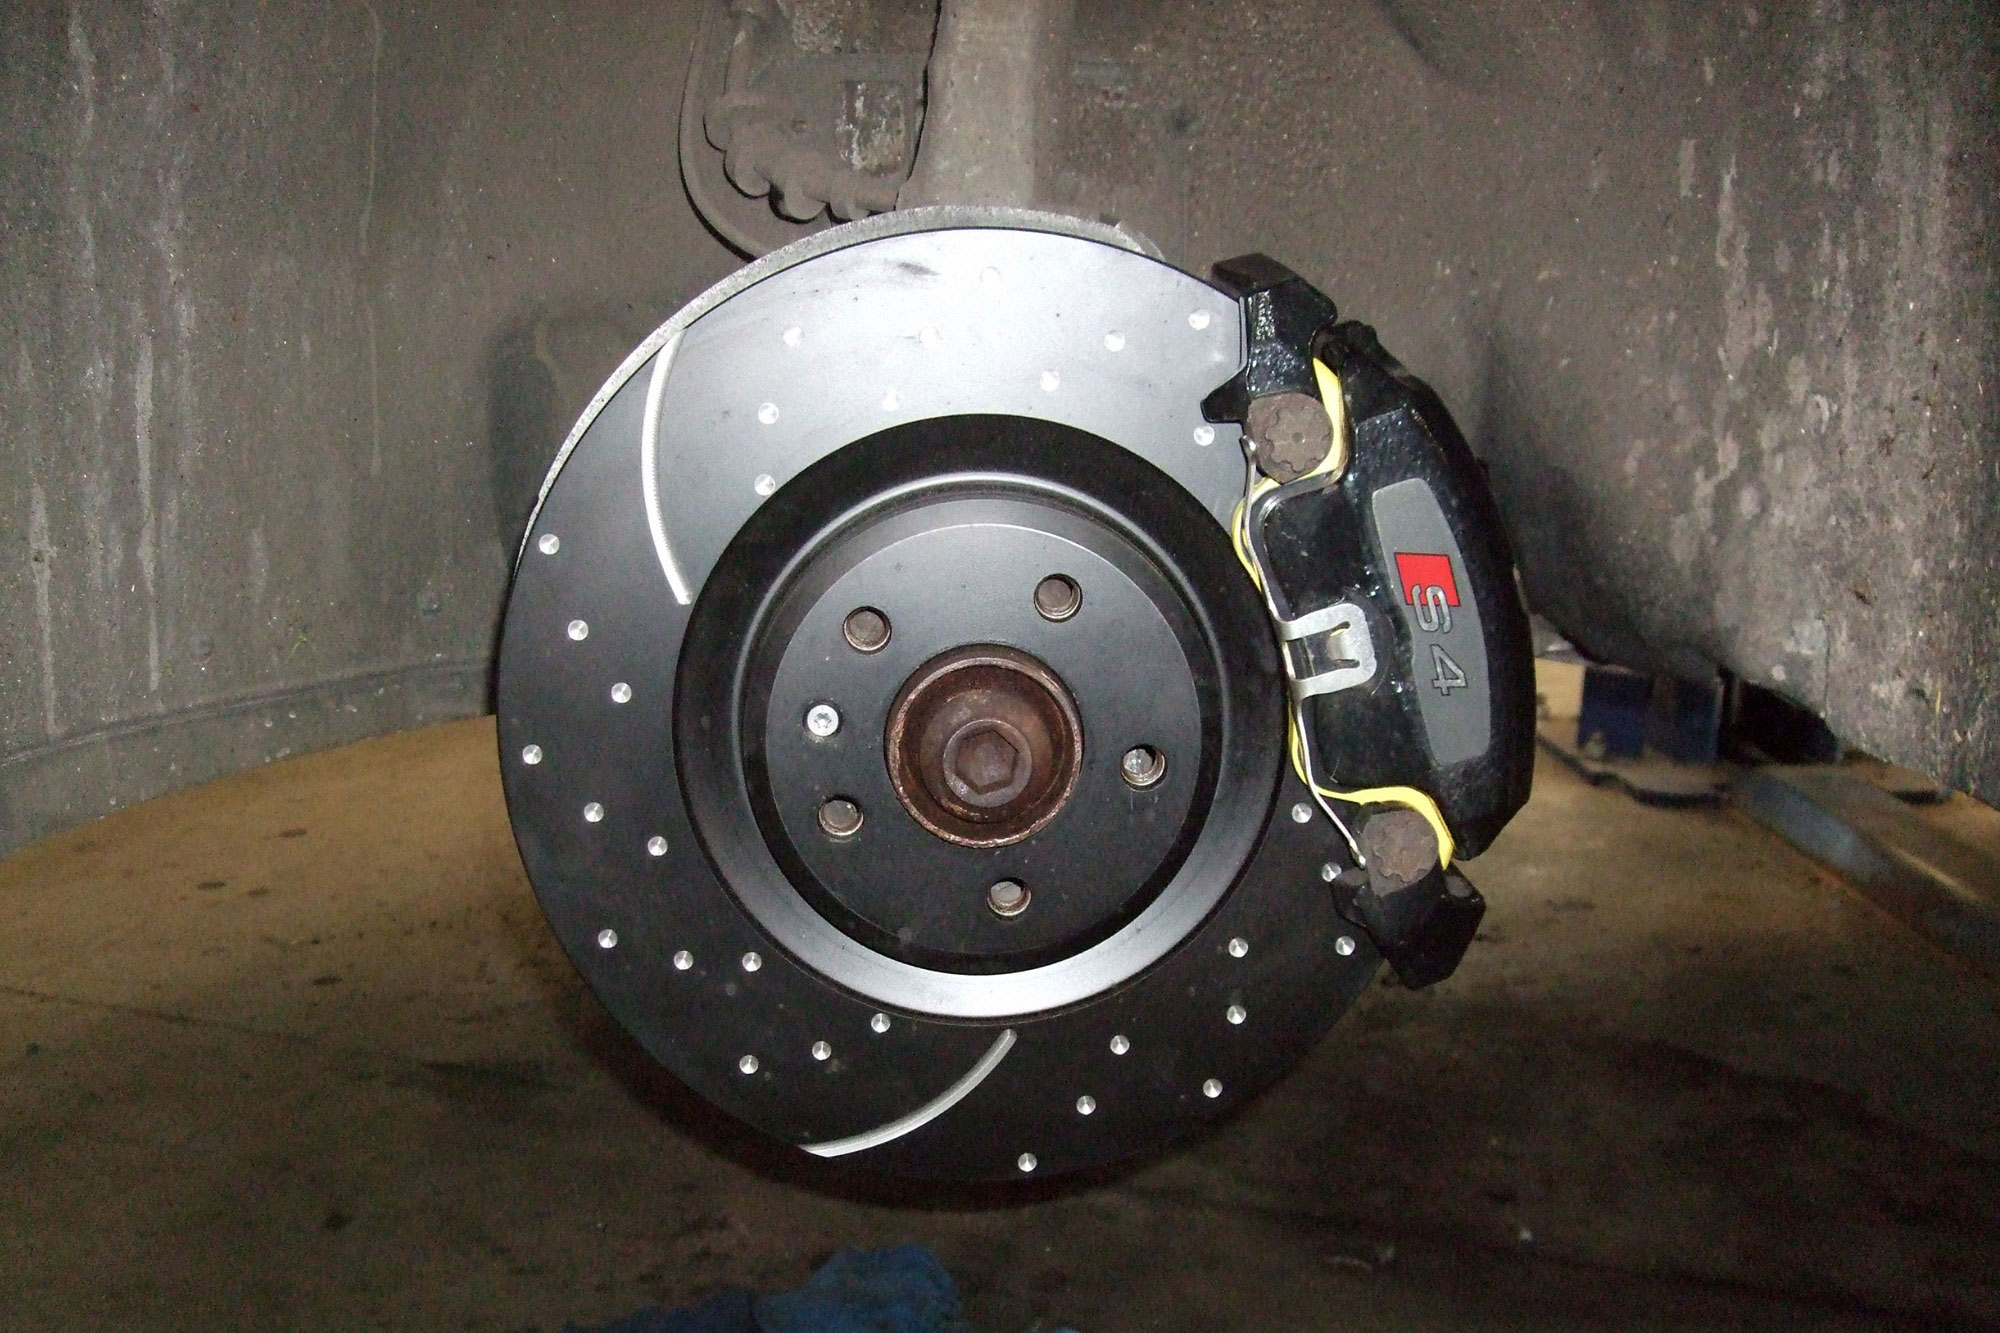 Brake repairs, replacements and servicing at Autotechnics Blandford